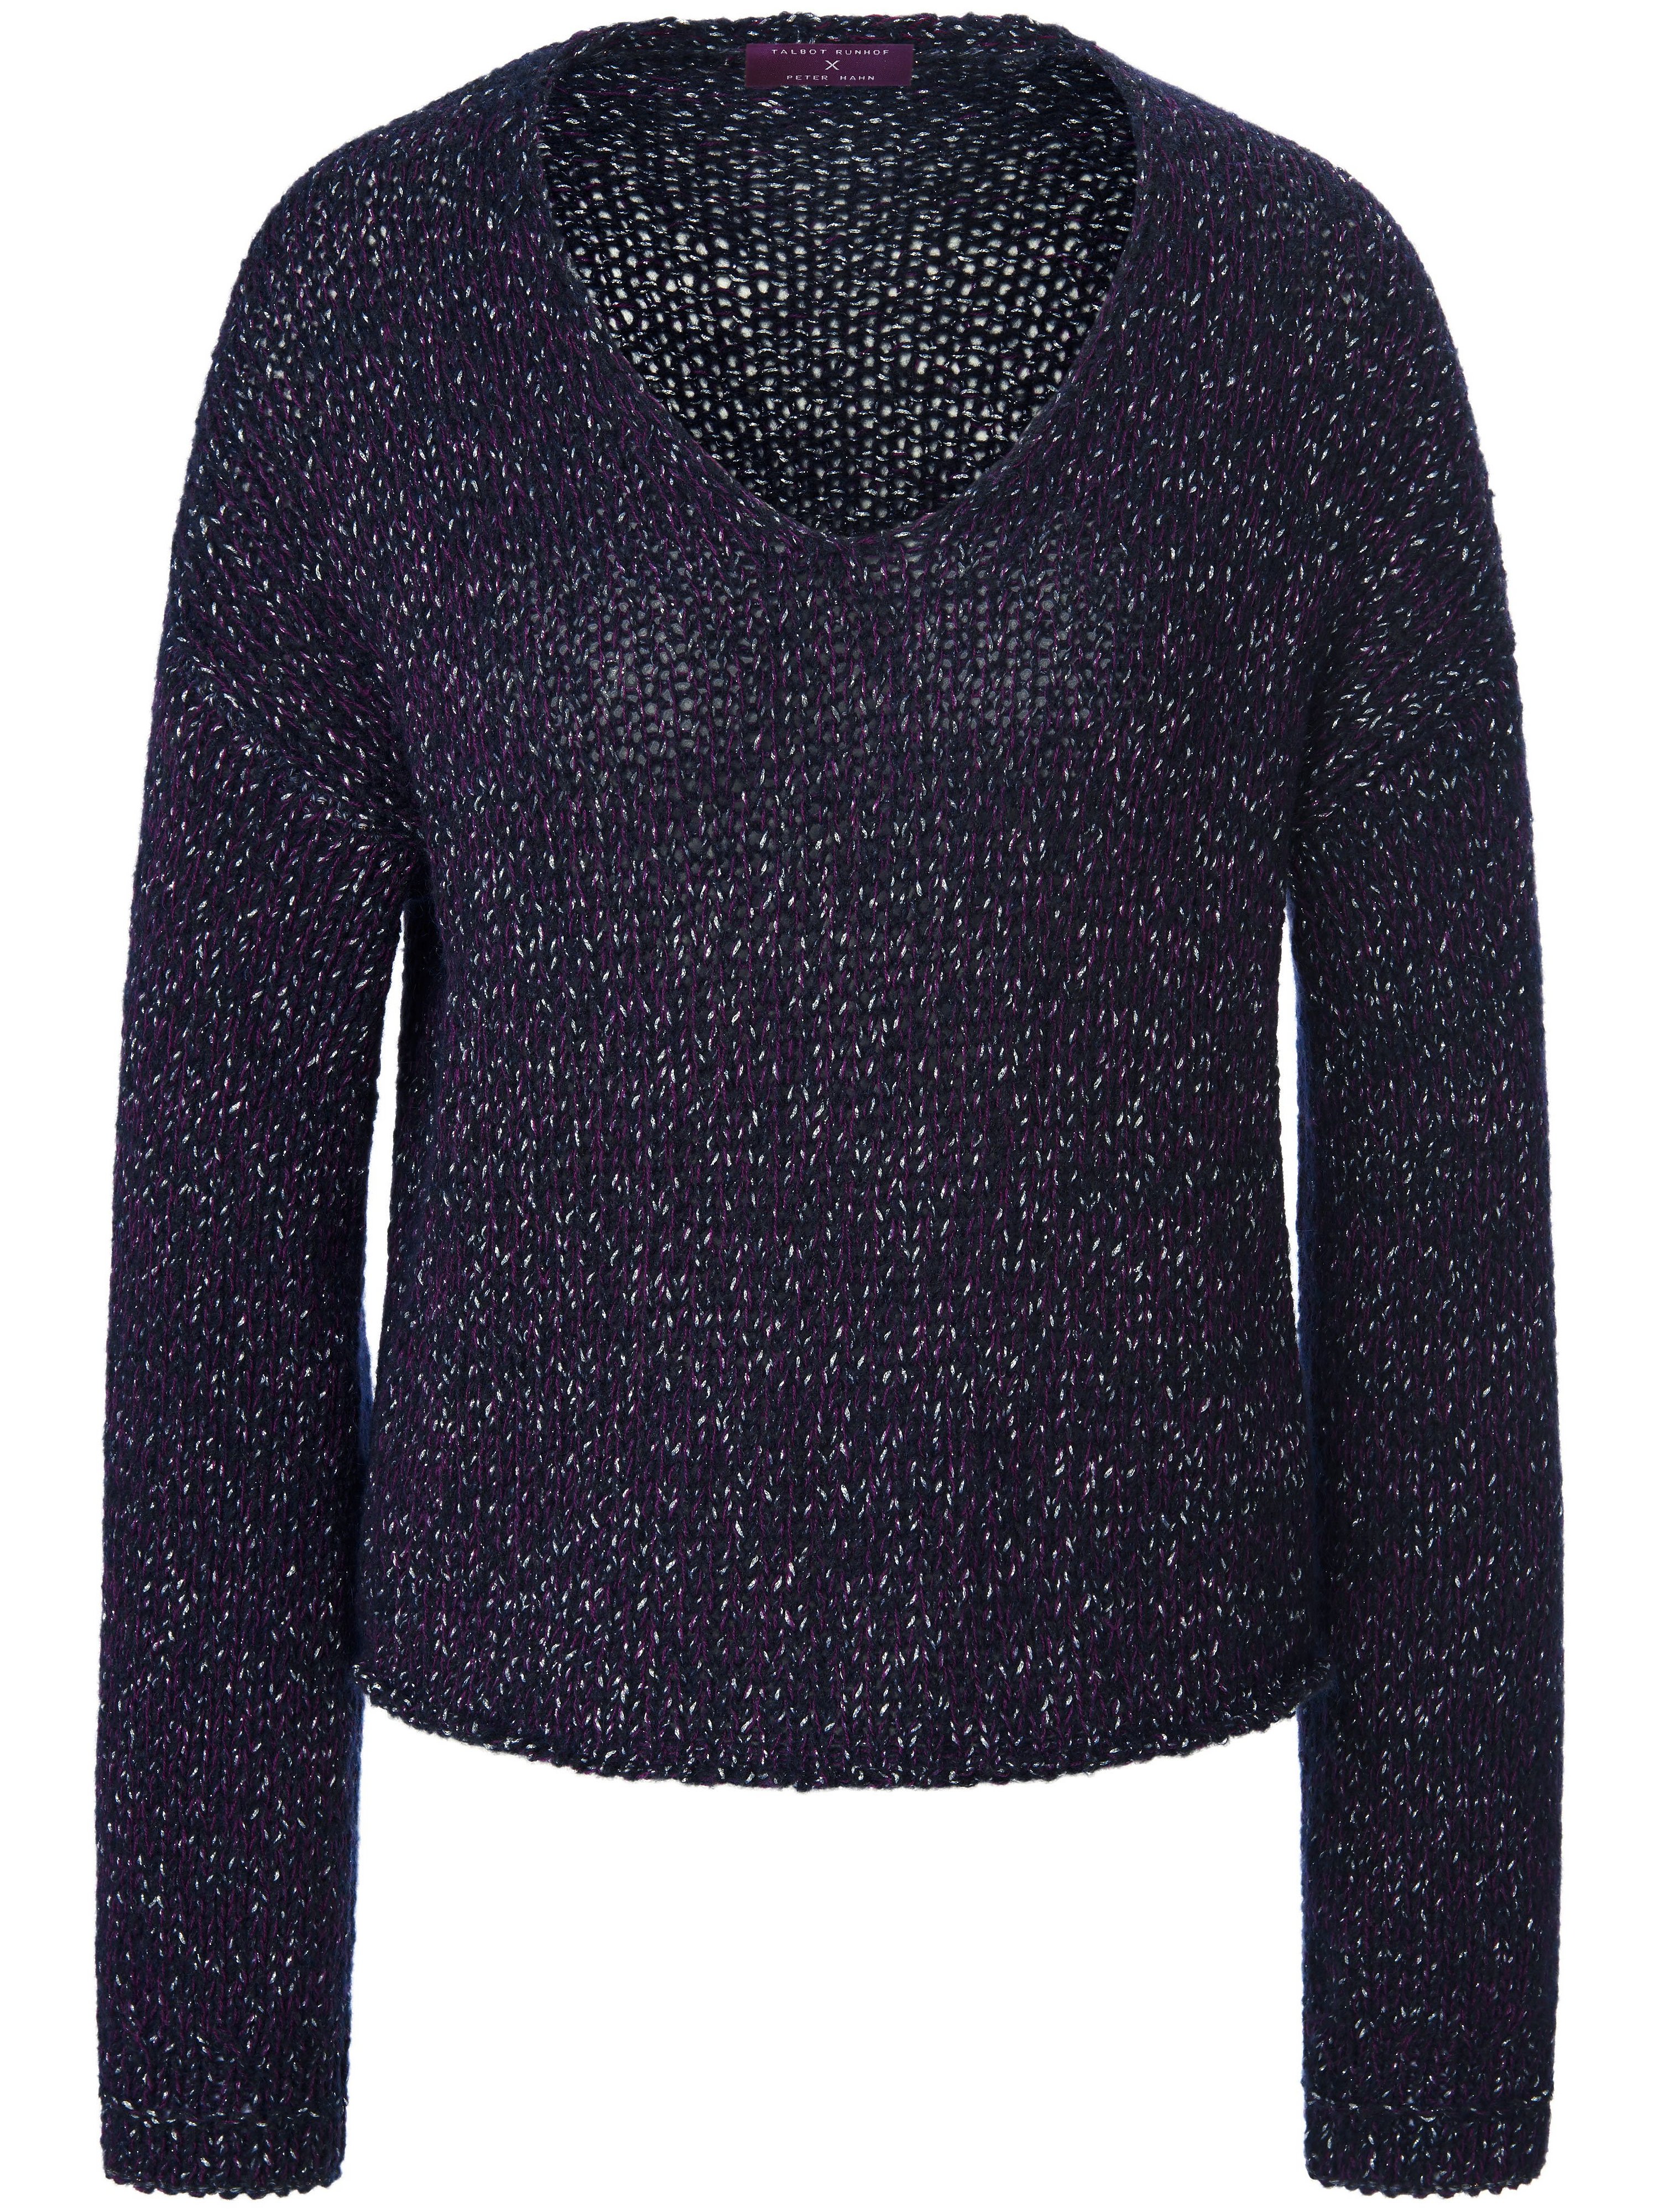 Le pull manches longues  TALBOT RUNHOF X PETER HAHN mauve taille 46